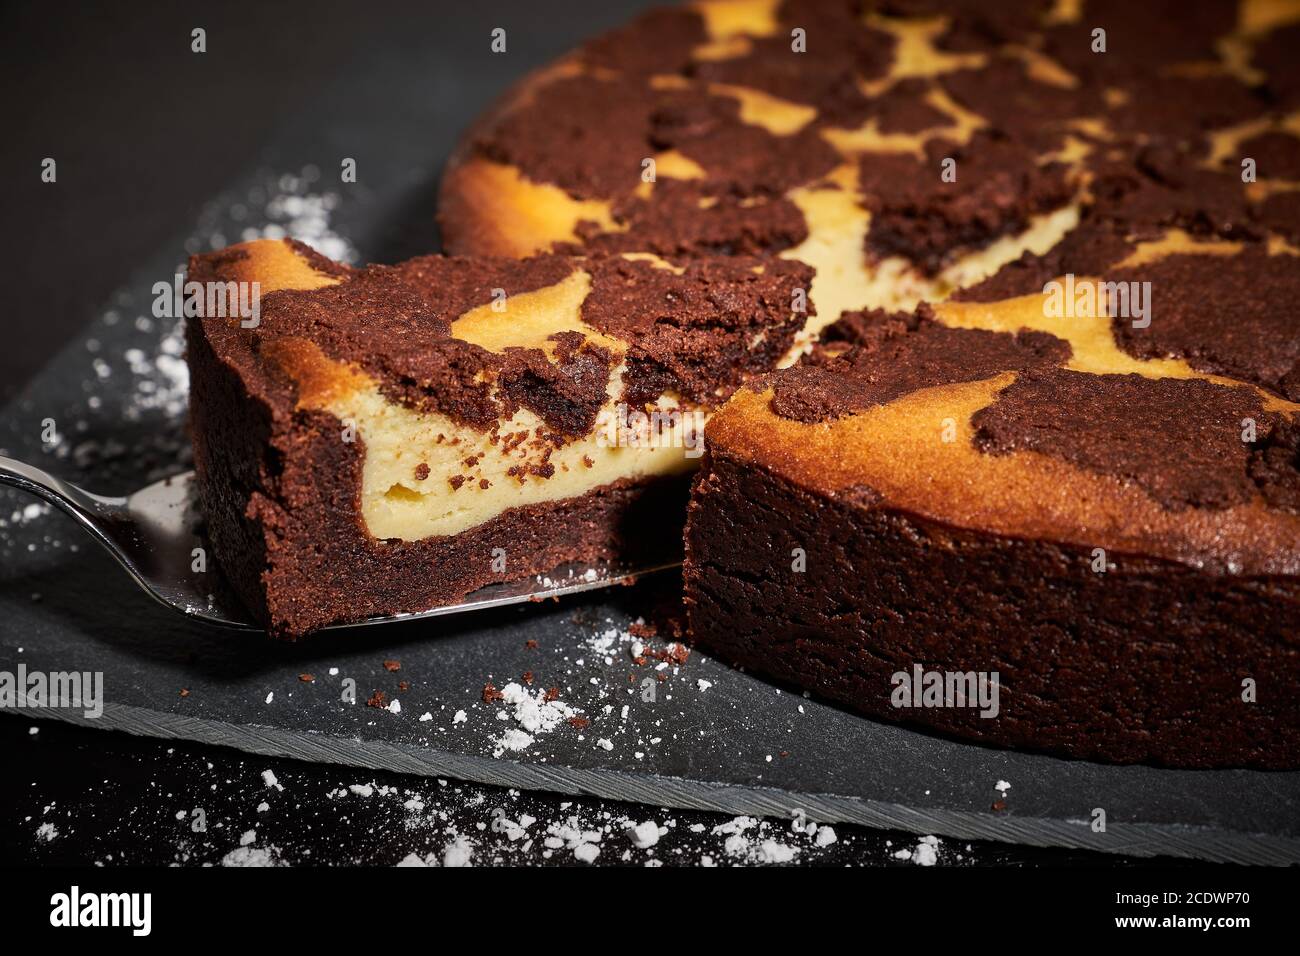 Russian Chocolate Cheesecake with Cake Lifter Stock Photo